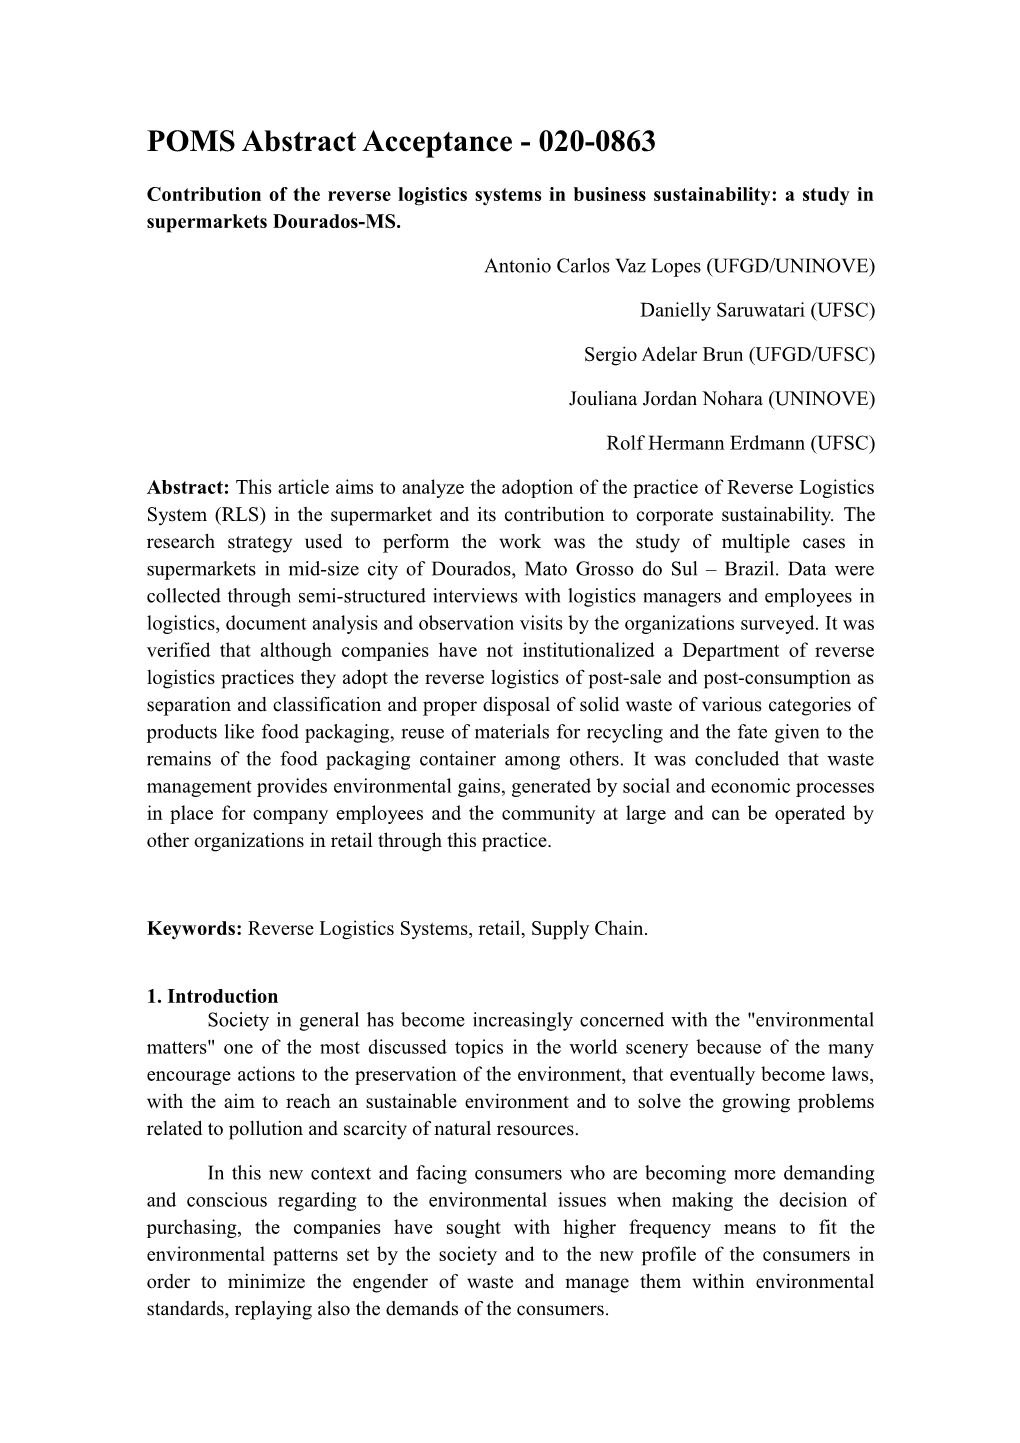 Contribution of the Reverse Logistics Systems in Business Sustainability: a Study In